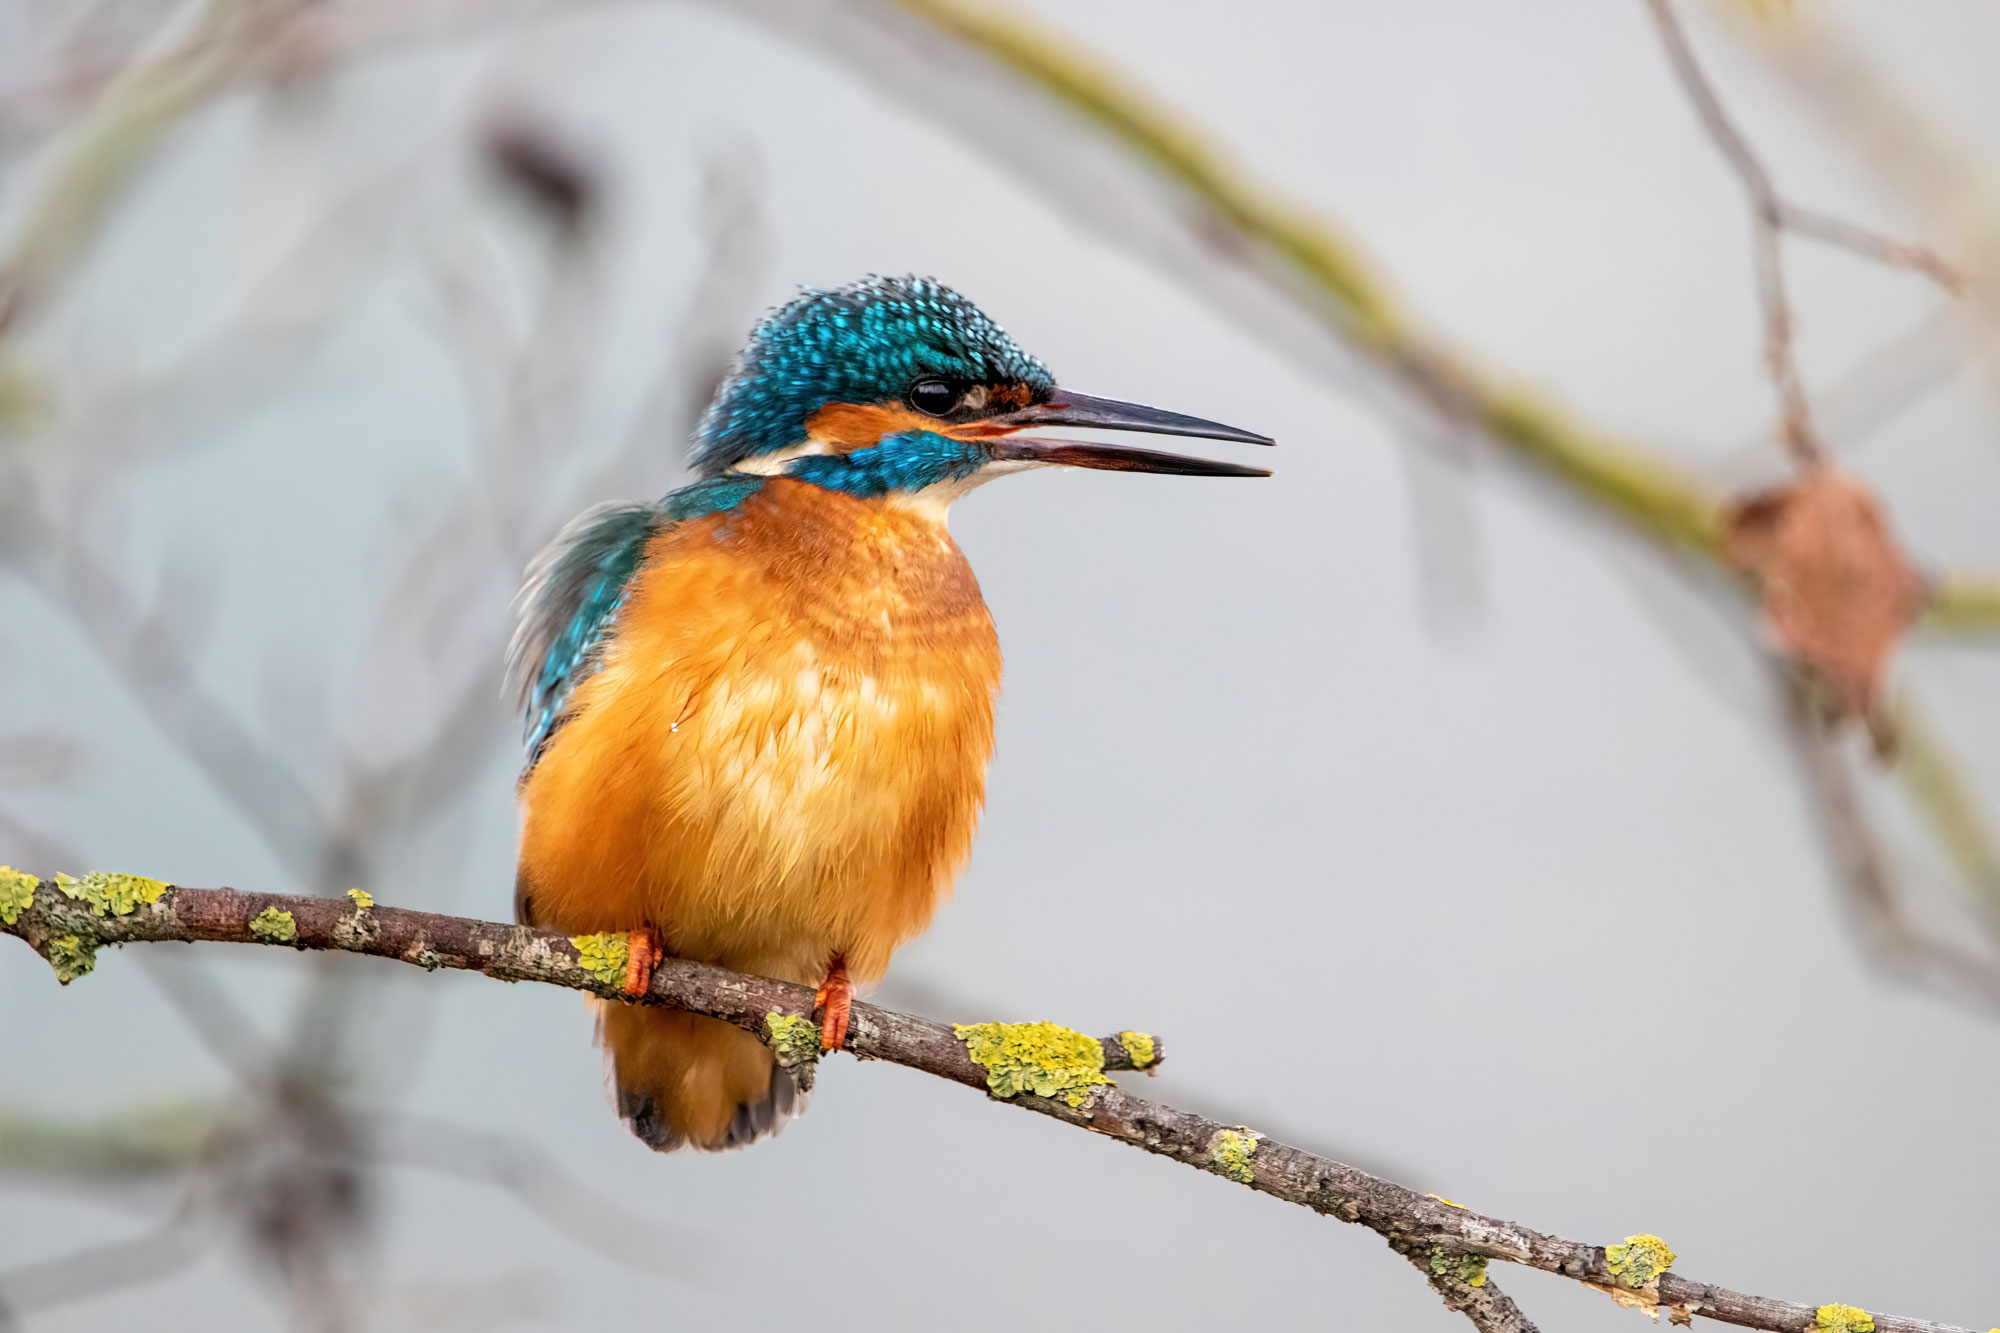 Photograph of a common kingfisher sitting on a branch. The photo shows a bird with a blue, orange, and black head and an orange breast. Its beak is black and partially open.